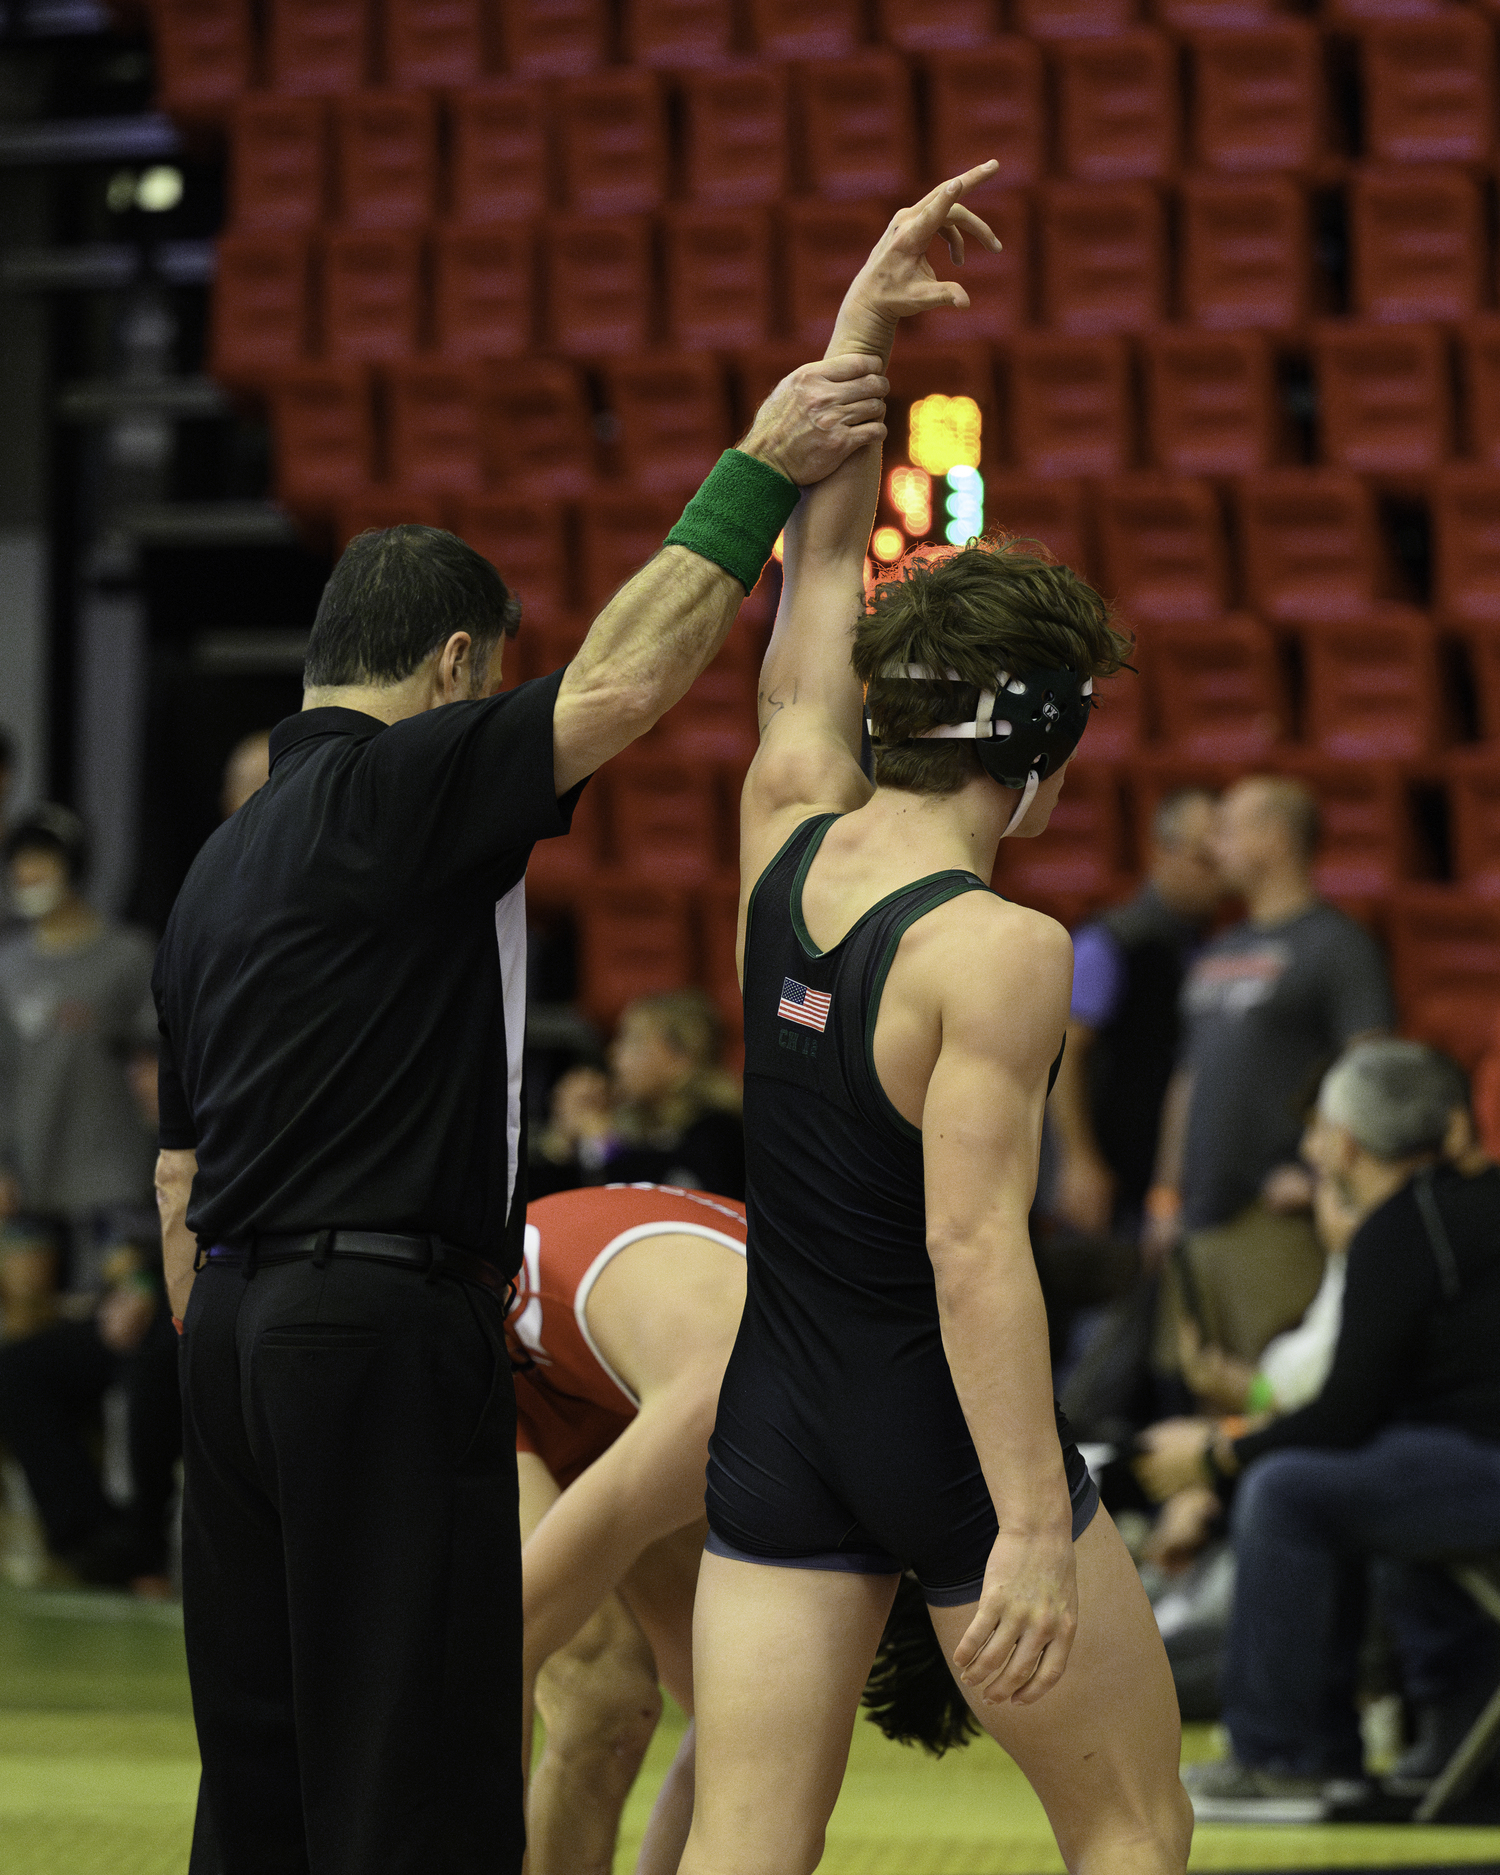 Hurricane Andrew Lewis gets his arm raised after winning his opening-round match.   MARIANNE BARNETT